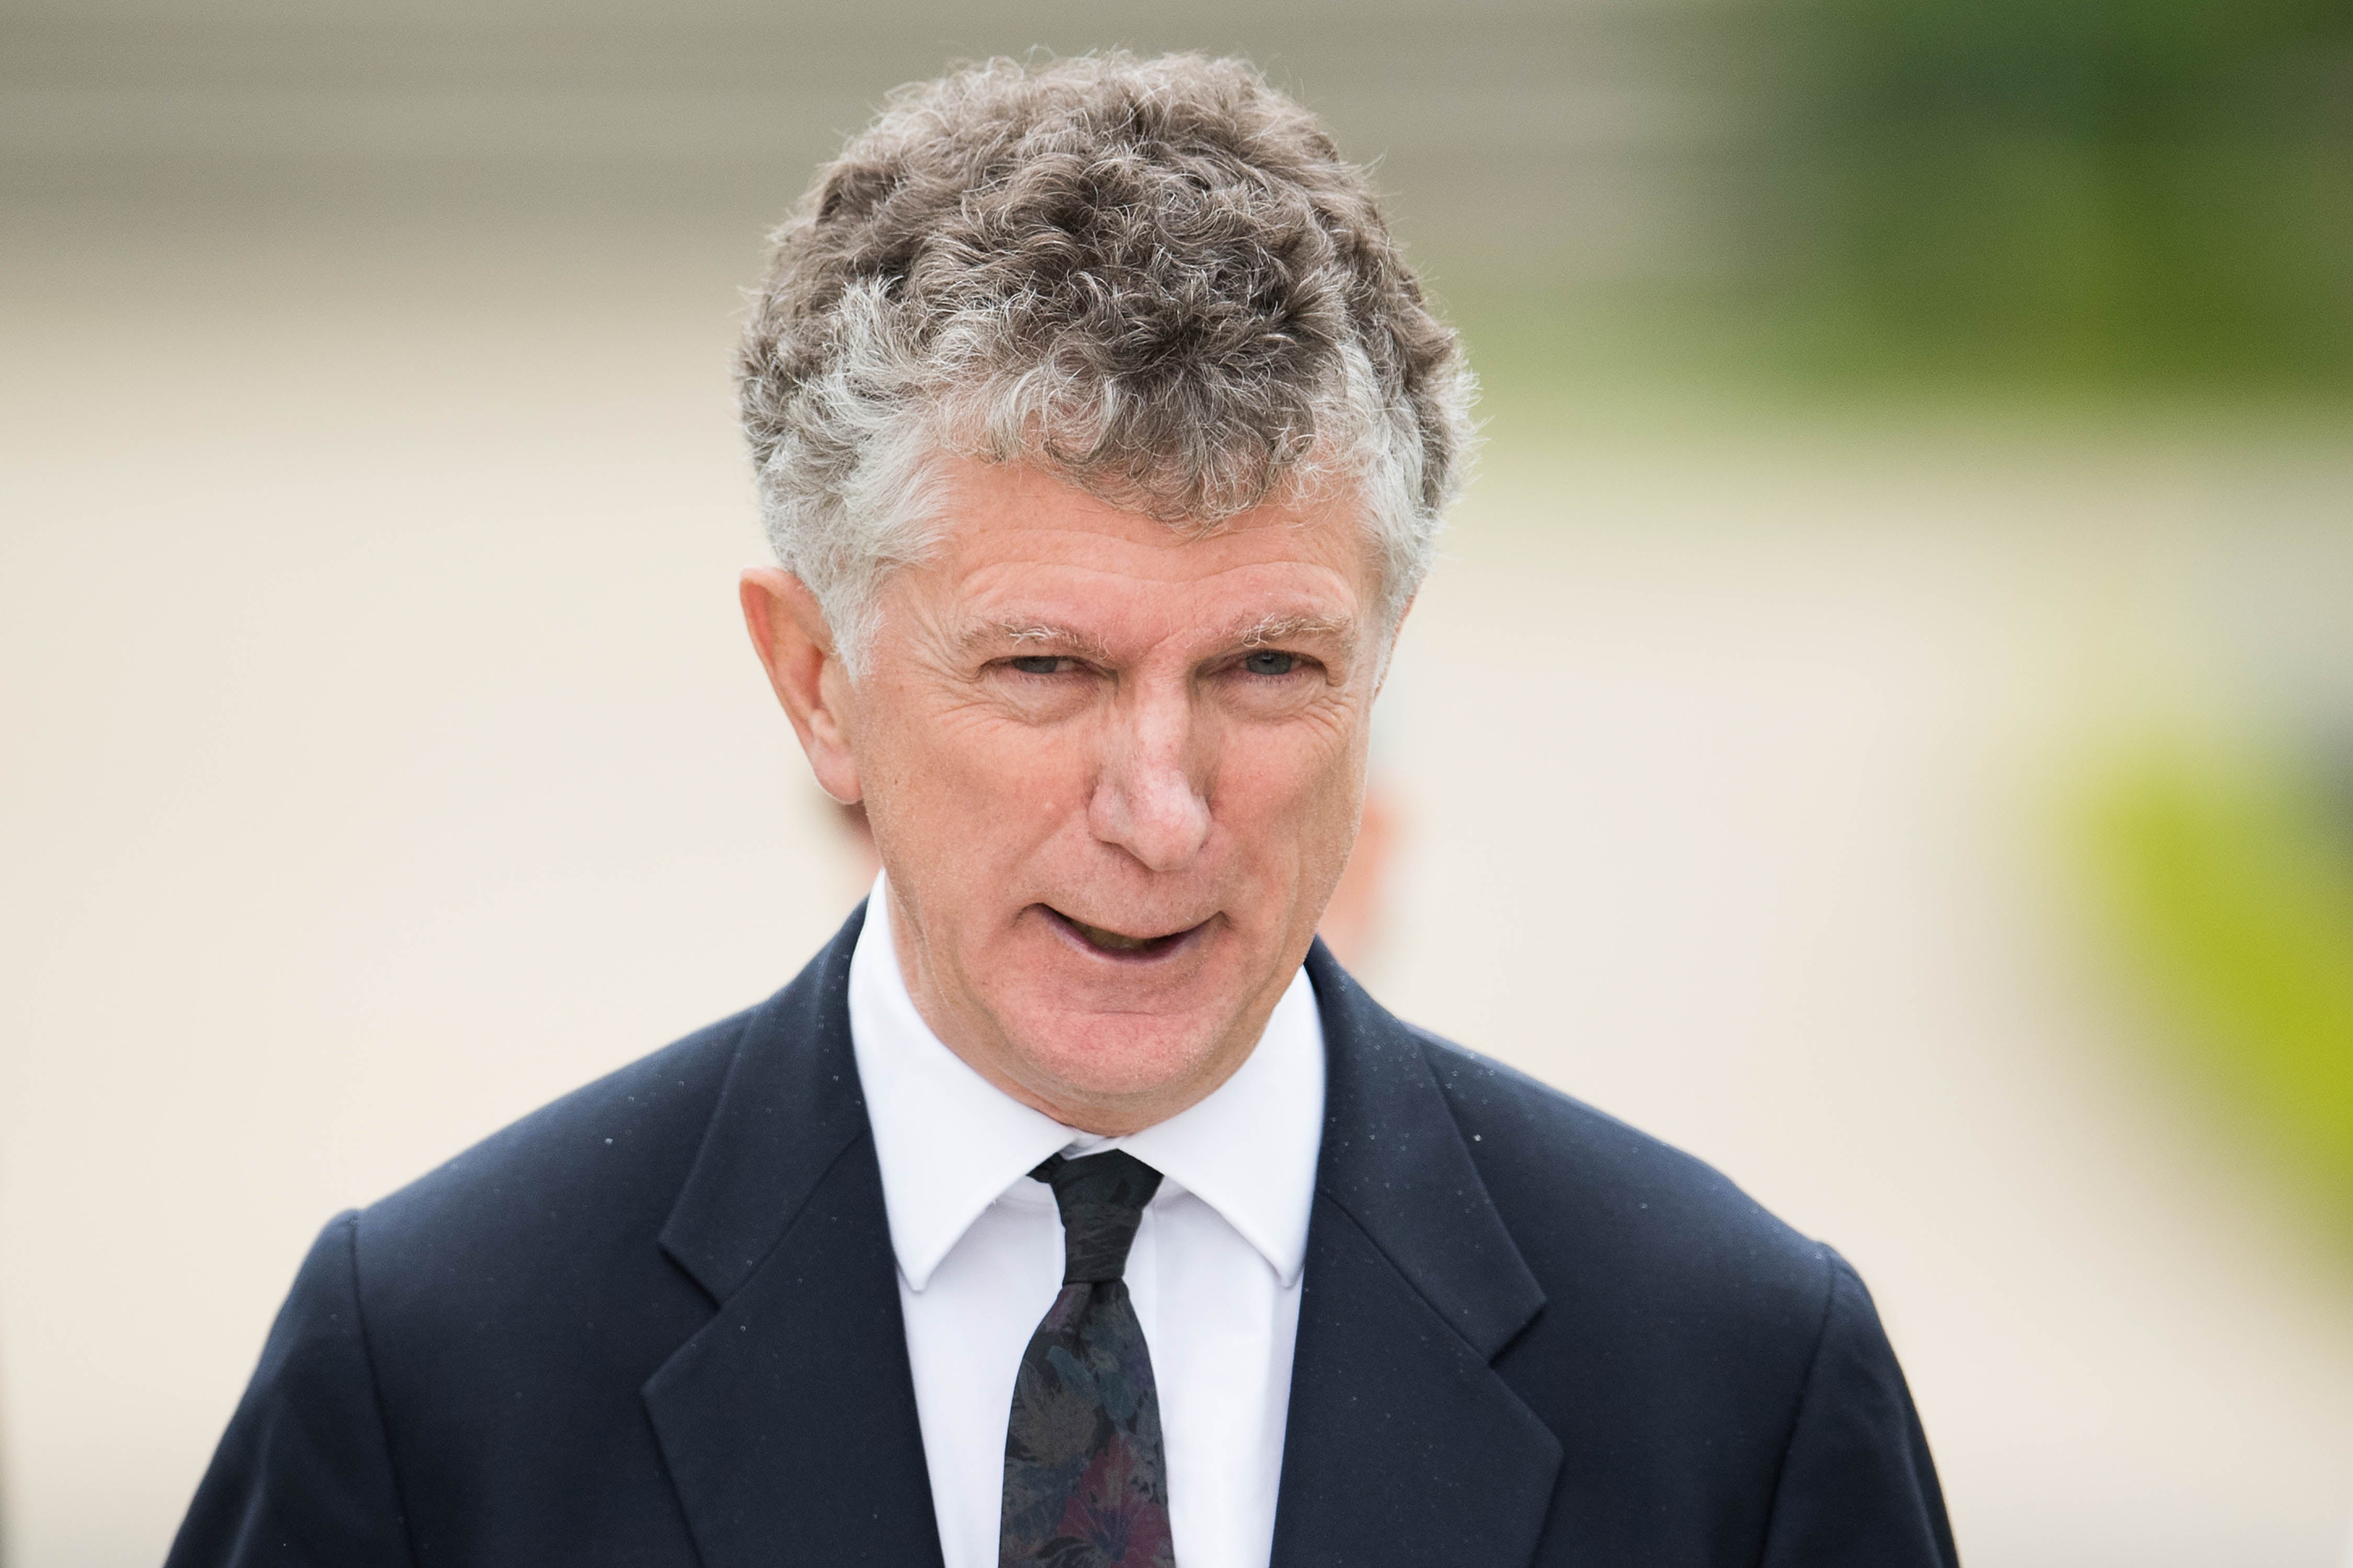 Jonathan Powell presented former PM Tony Blair with a ‘nuclear option’ for curbing illegal migration